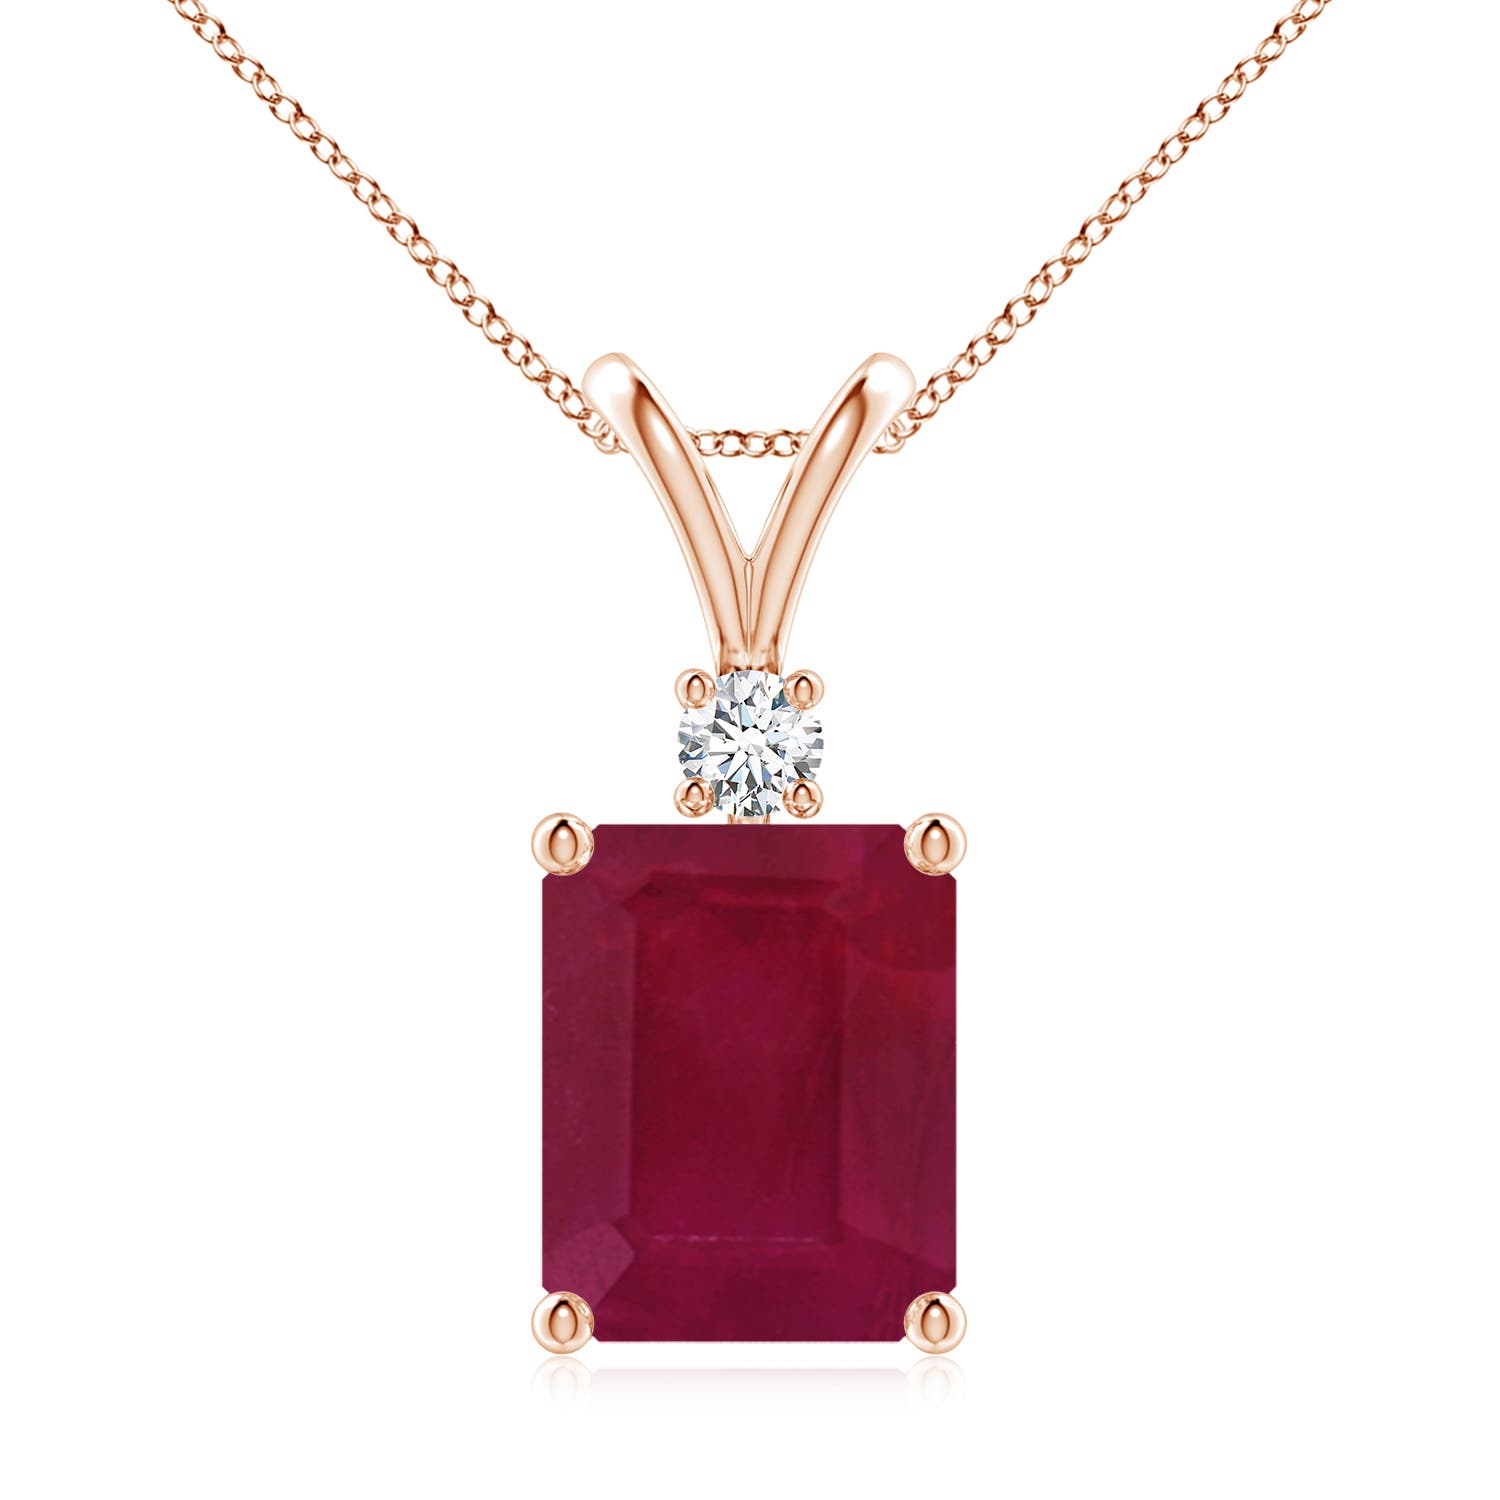 A - Ruby / 4.11 CT / 14 KT Rose Gold